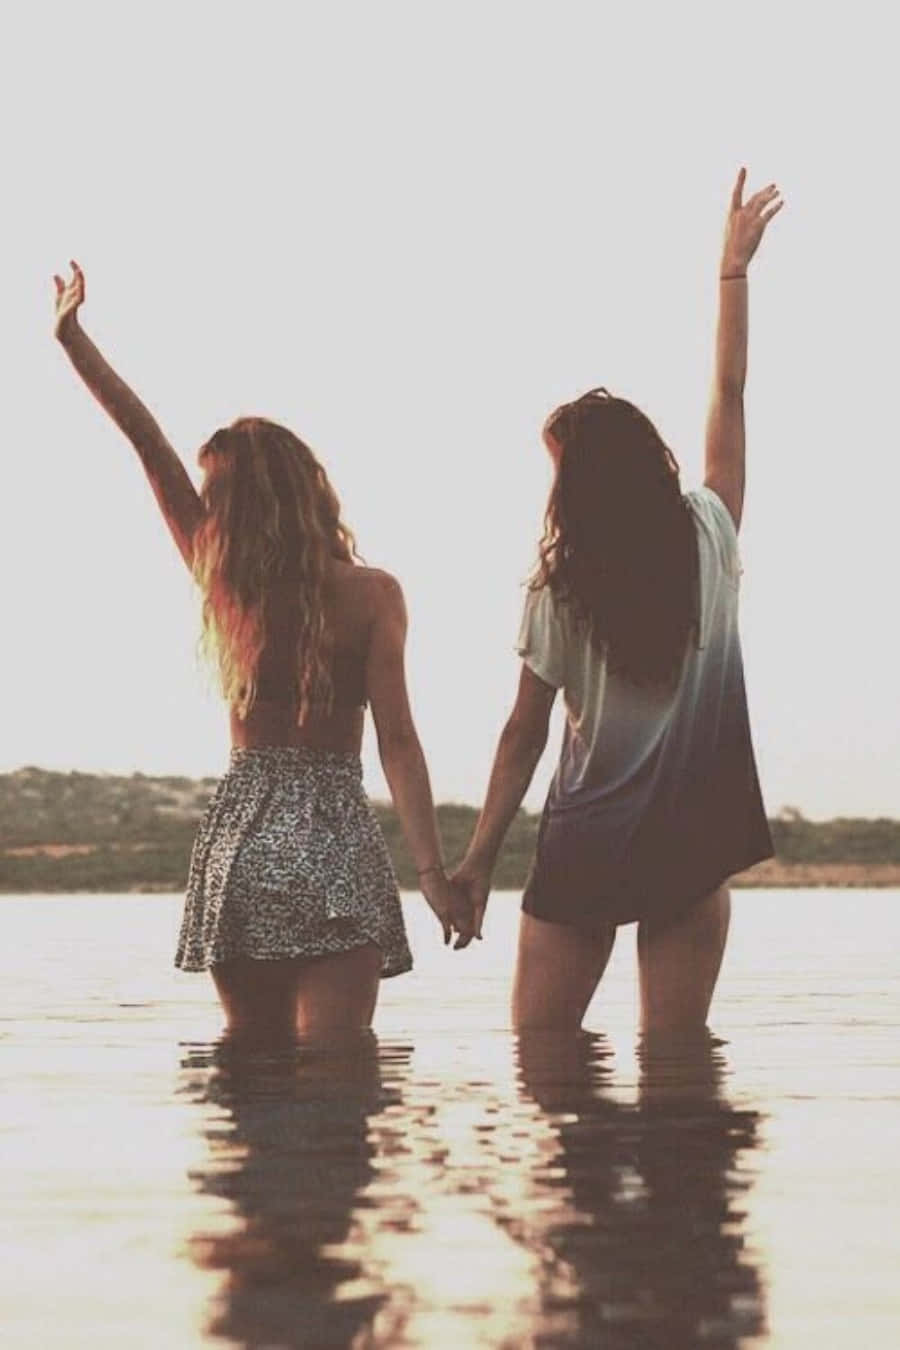 Best Friends Wallpaper Discover more Best Friend, Best Friends, Best friends  forever, Bff, Friend wallp… | Best friend wallpaper, Friends wallpaper, Friends  forever